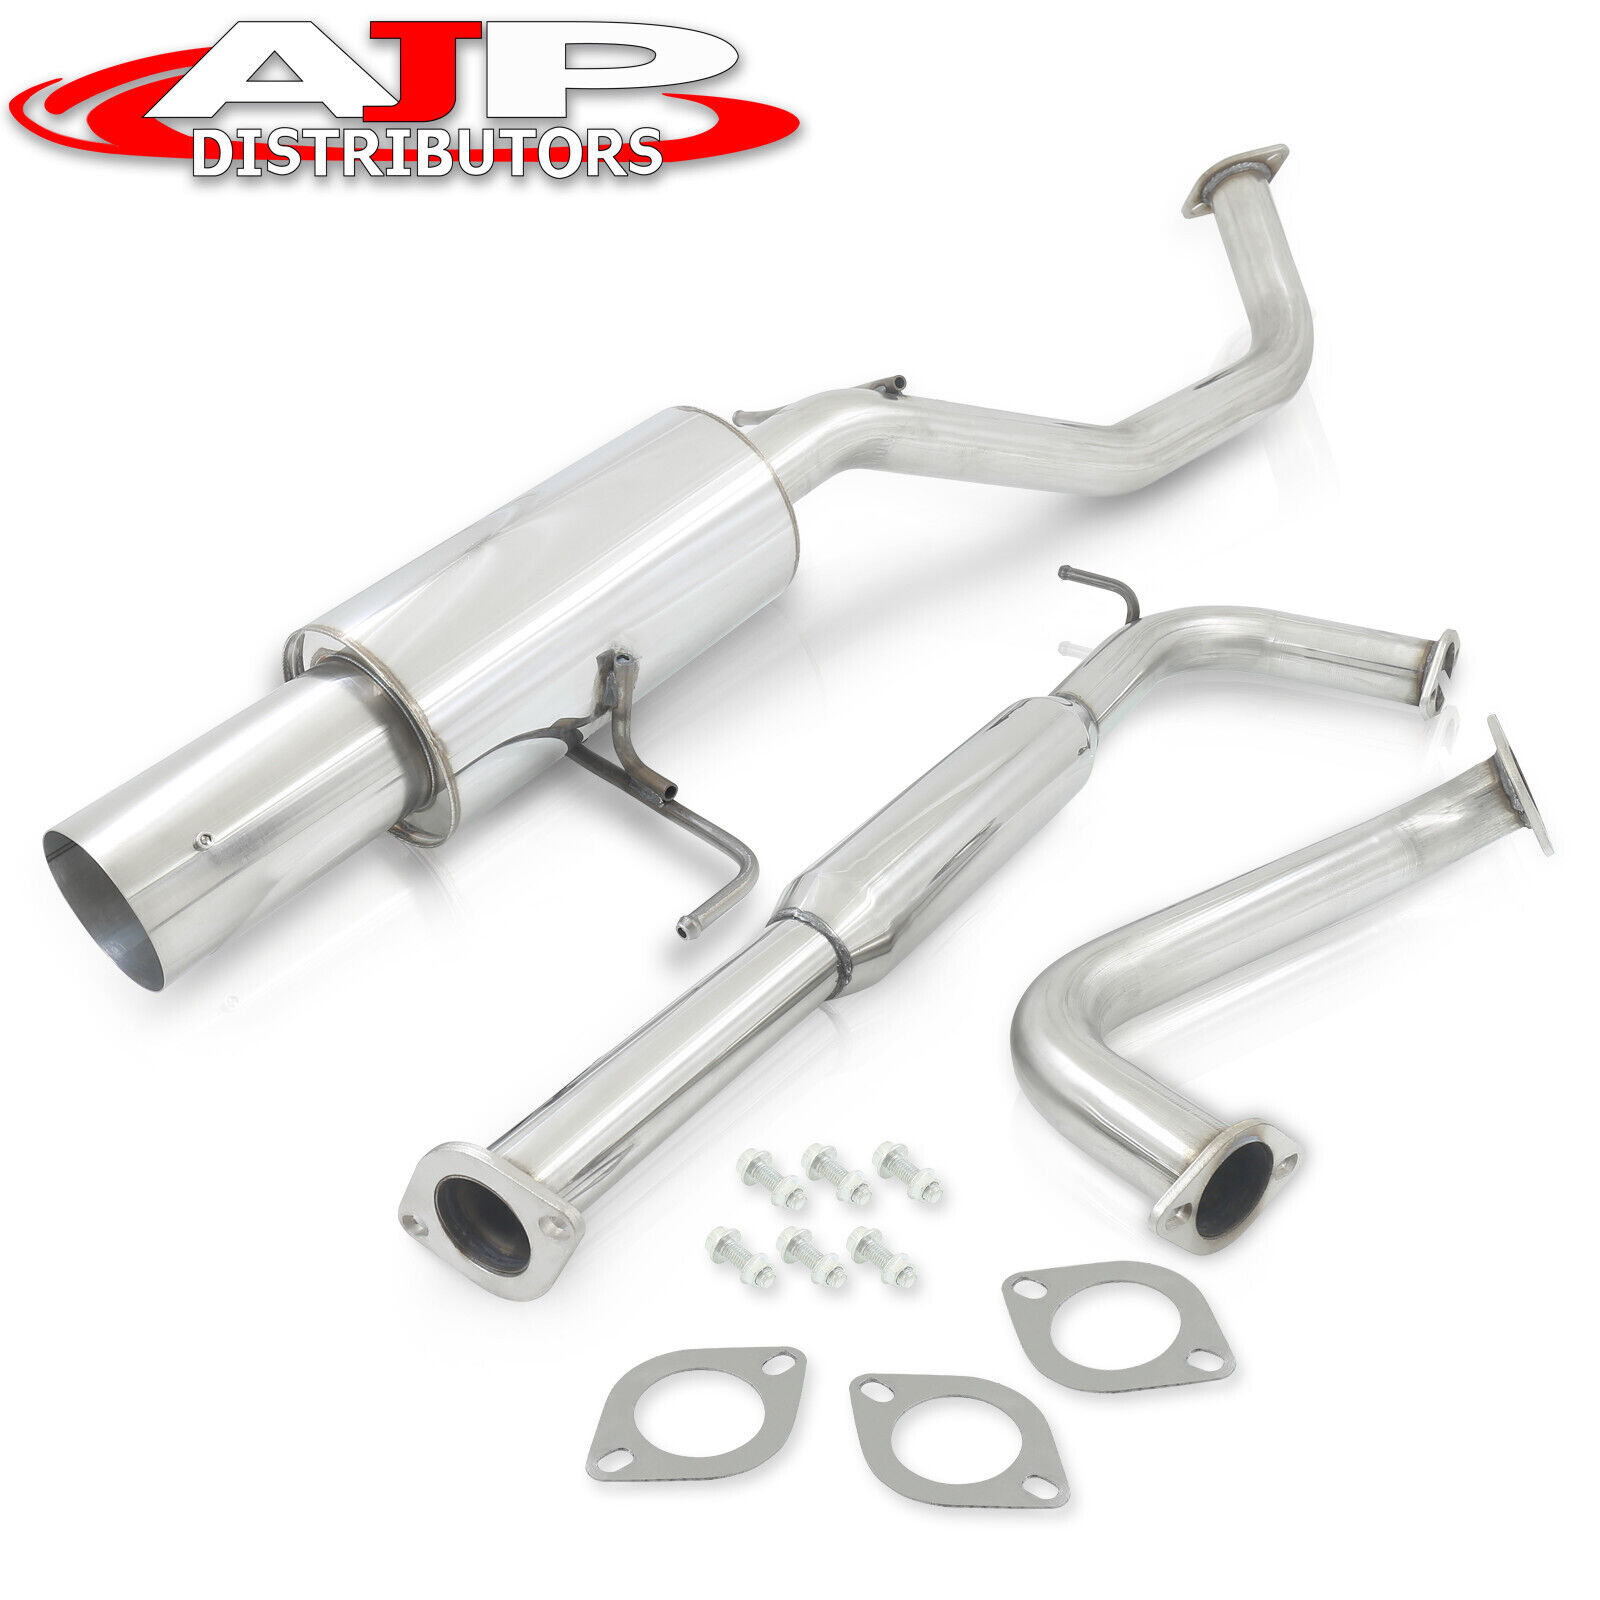 Stainless Steel Catback Exhaust System 57mm + 4